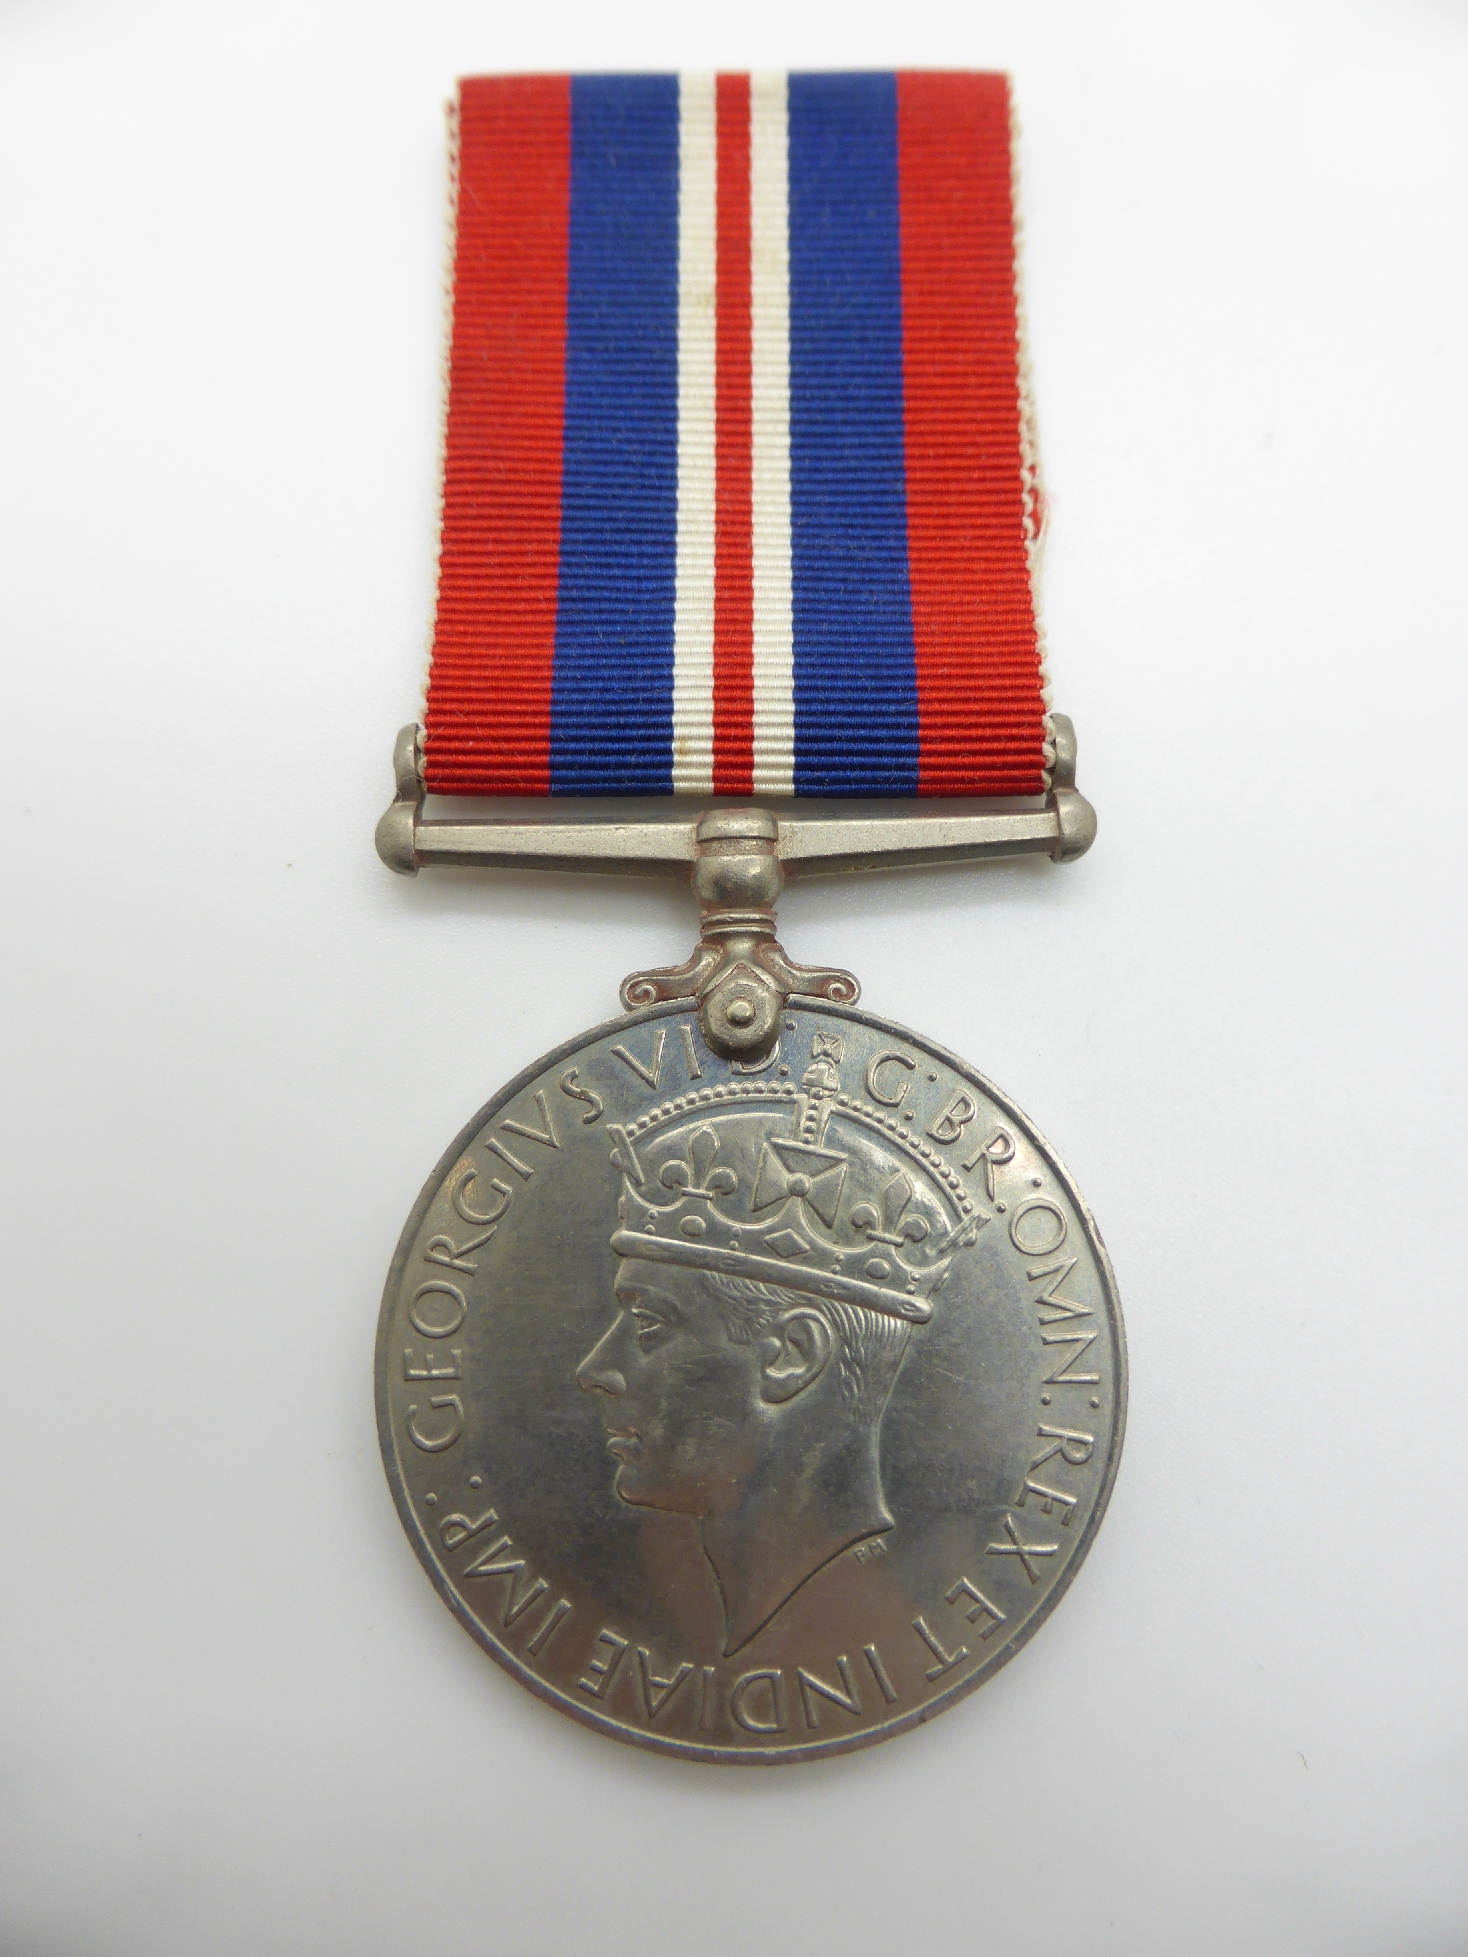 British Army WWII medals comprising 1939/45 Star, France and Germany Star, War Medal and Defence - Image 8 of 20